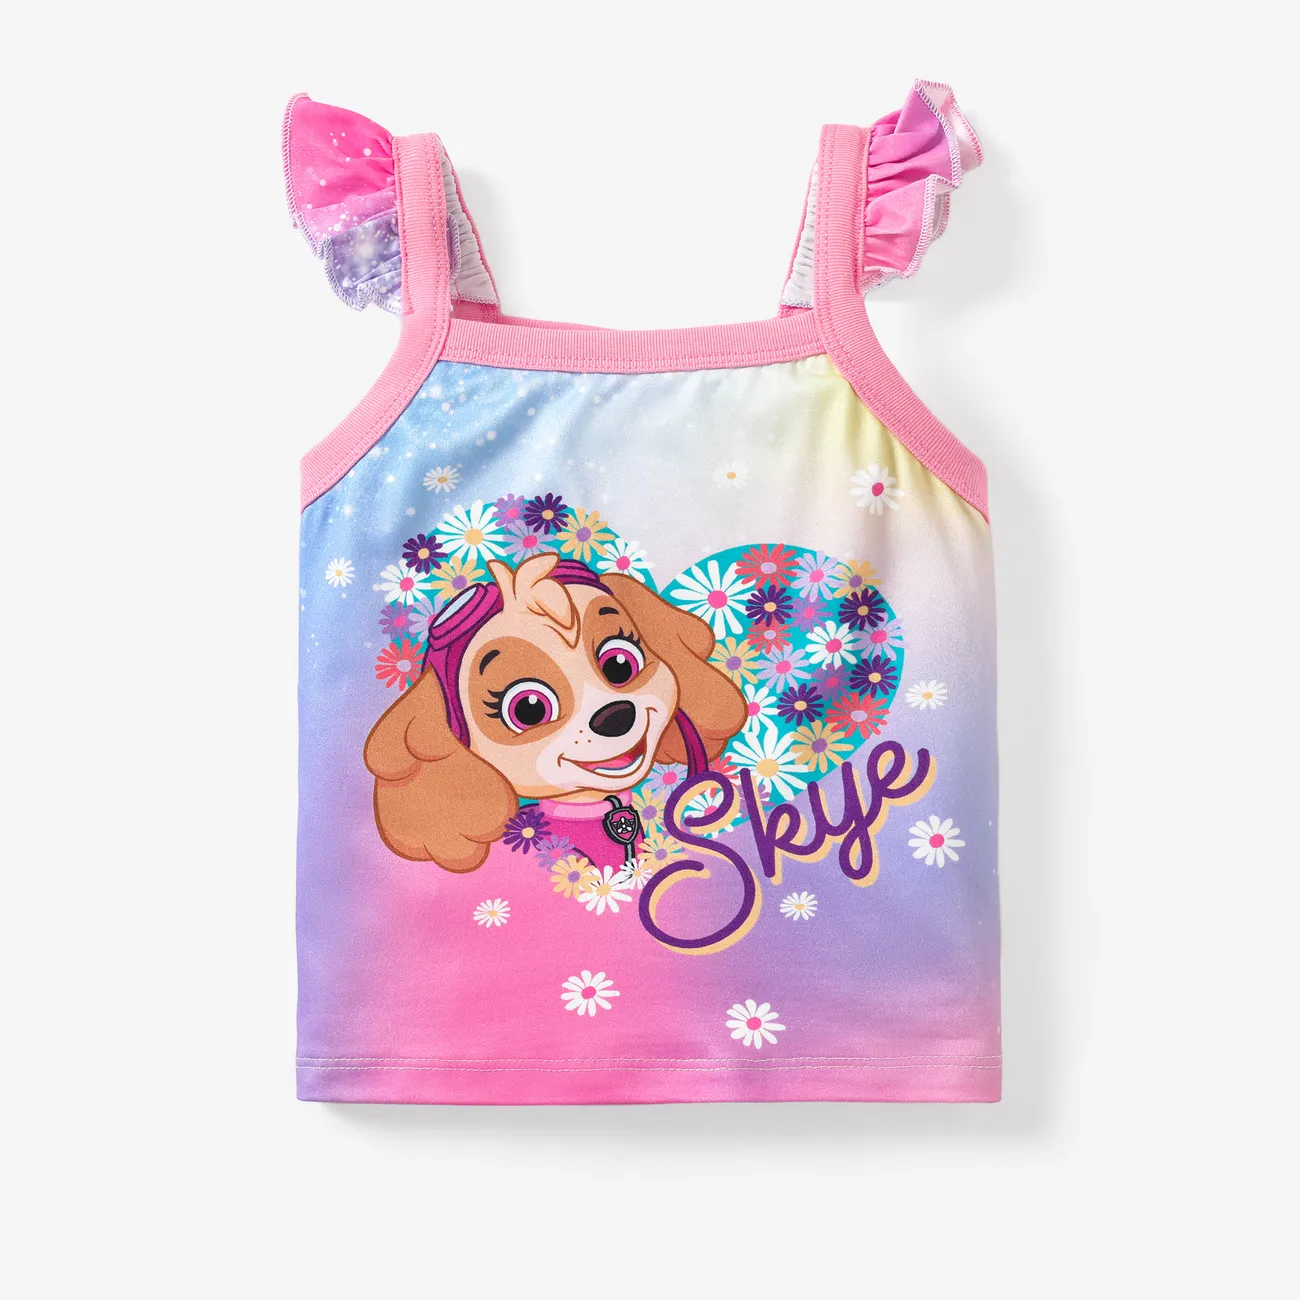 PAW Patrol 1pc Toddler Girls Character Floral Ruffled Camisole/Tank Top
 Colorful big image 1